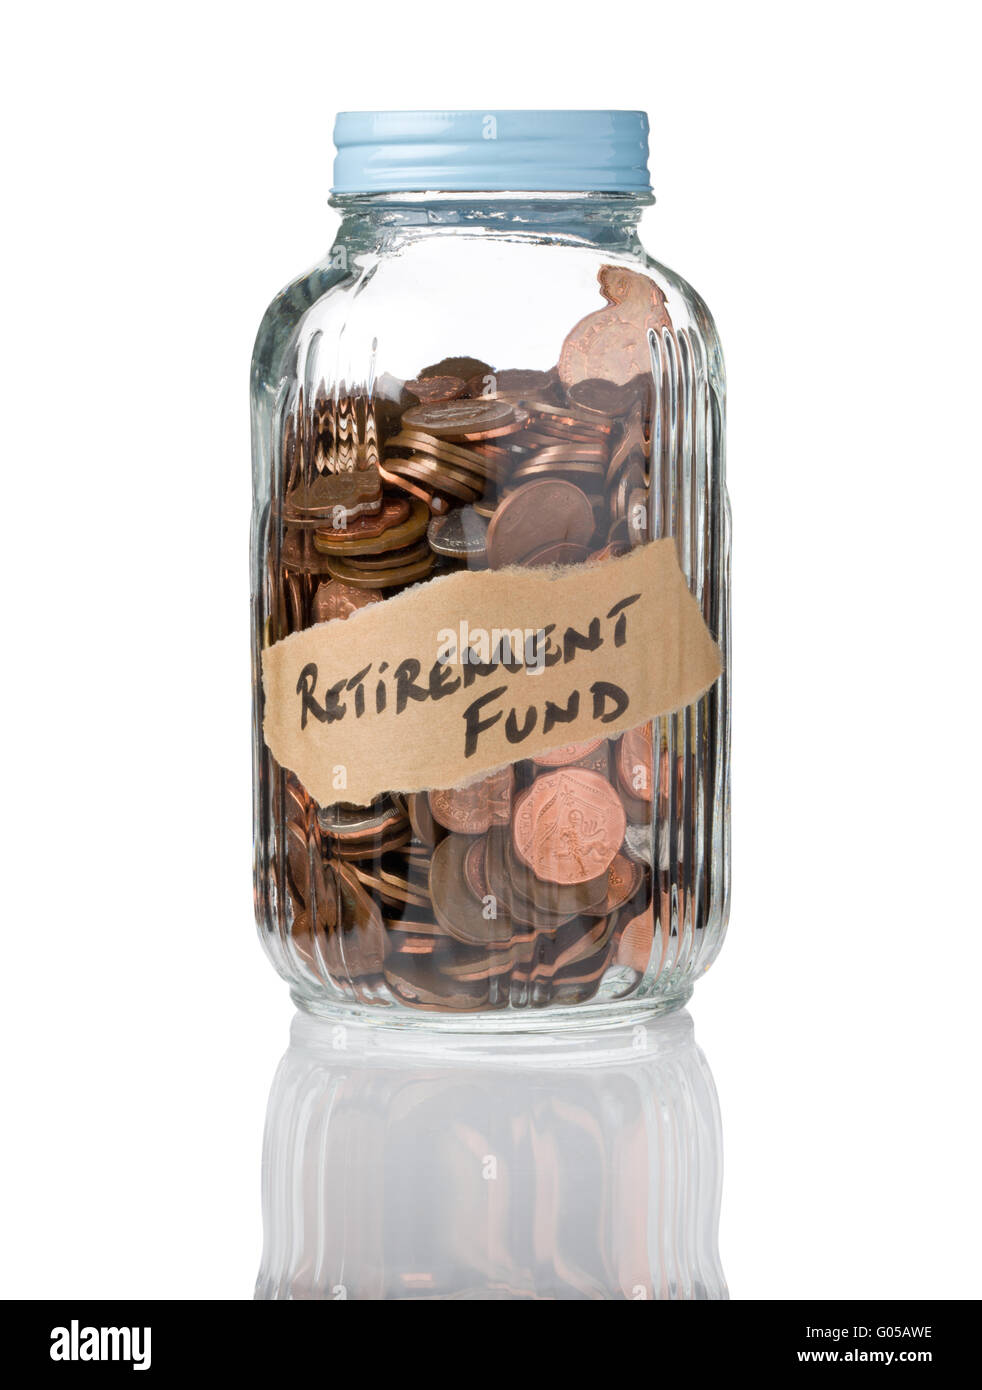 Retirement Fund written on a glass jar that is used for saving money. Stock Photo